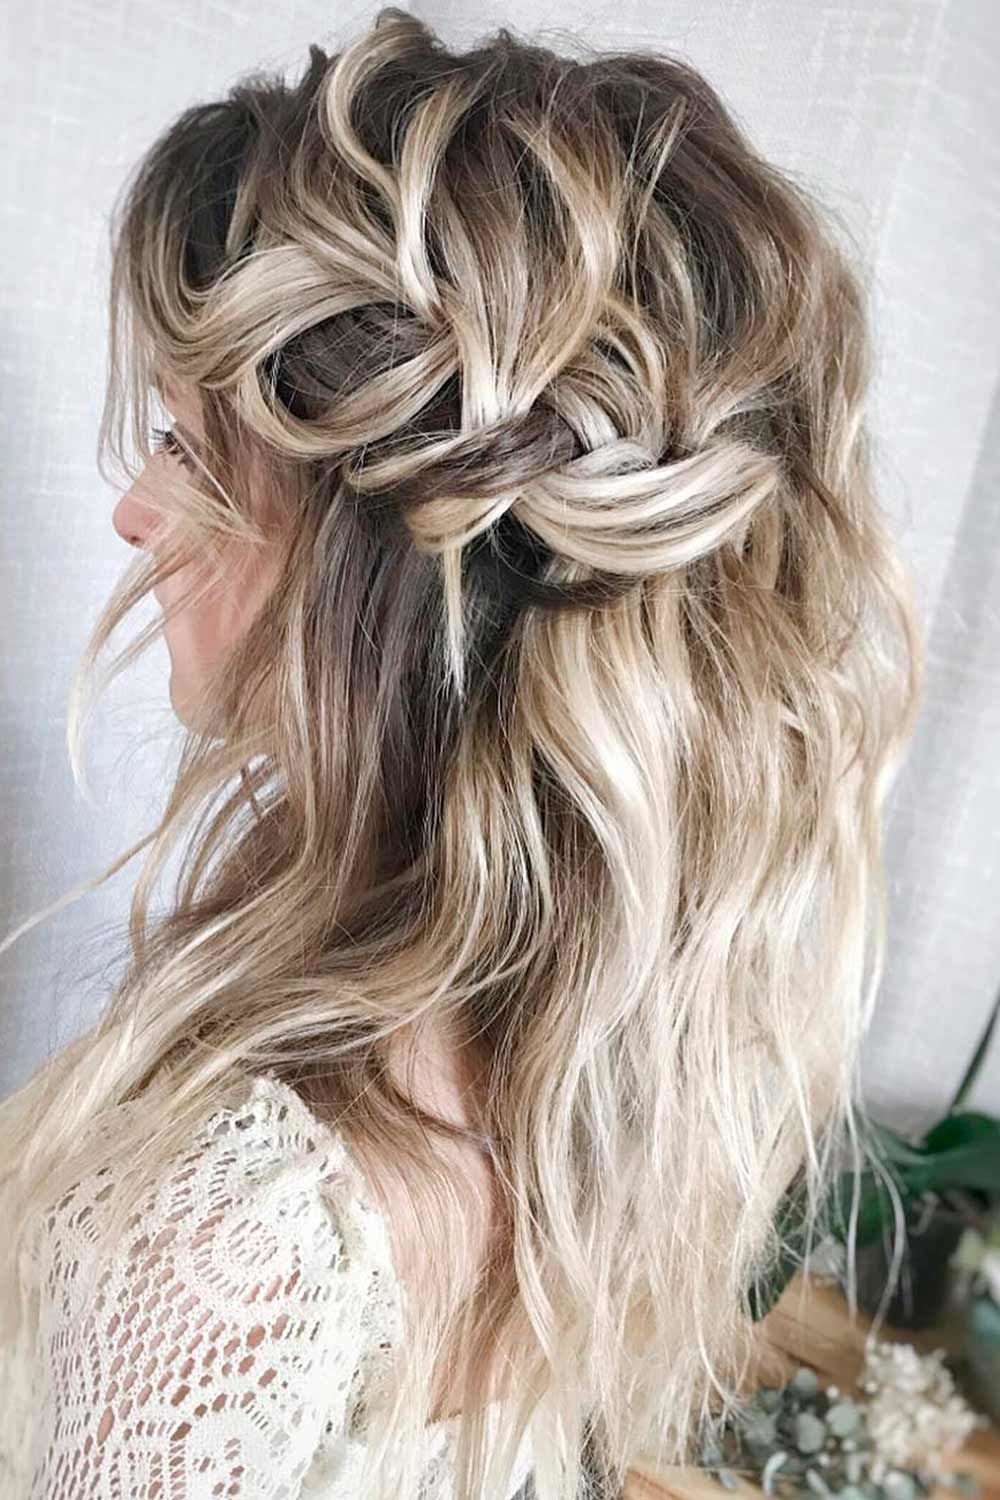 38 Mother Of The Bride Hairstyles For Glam Moms - Lovehairstyles